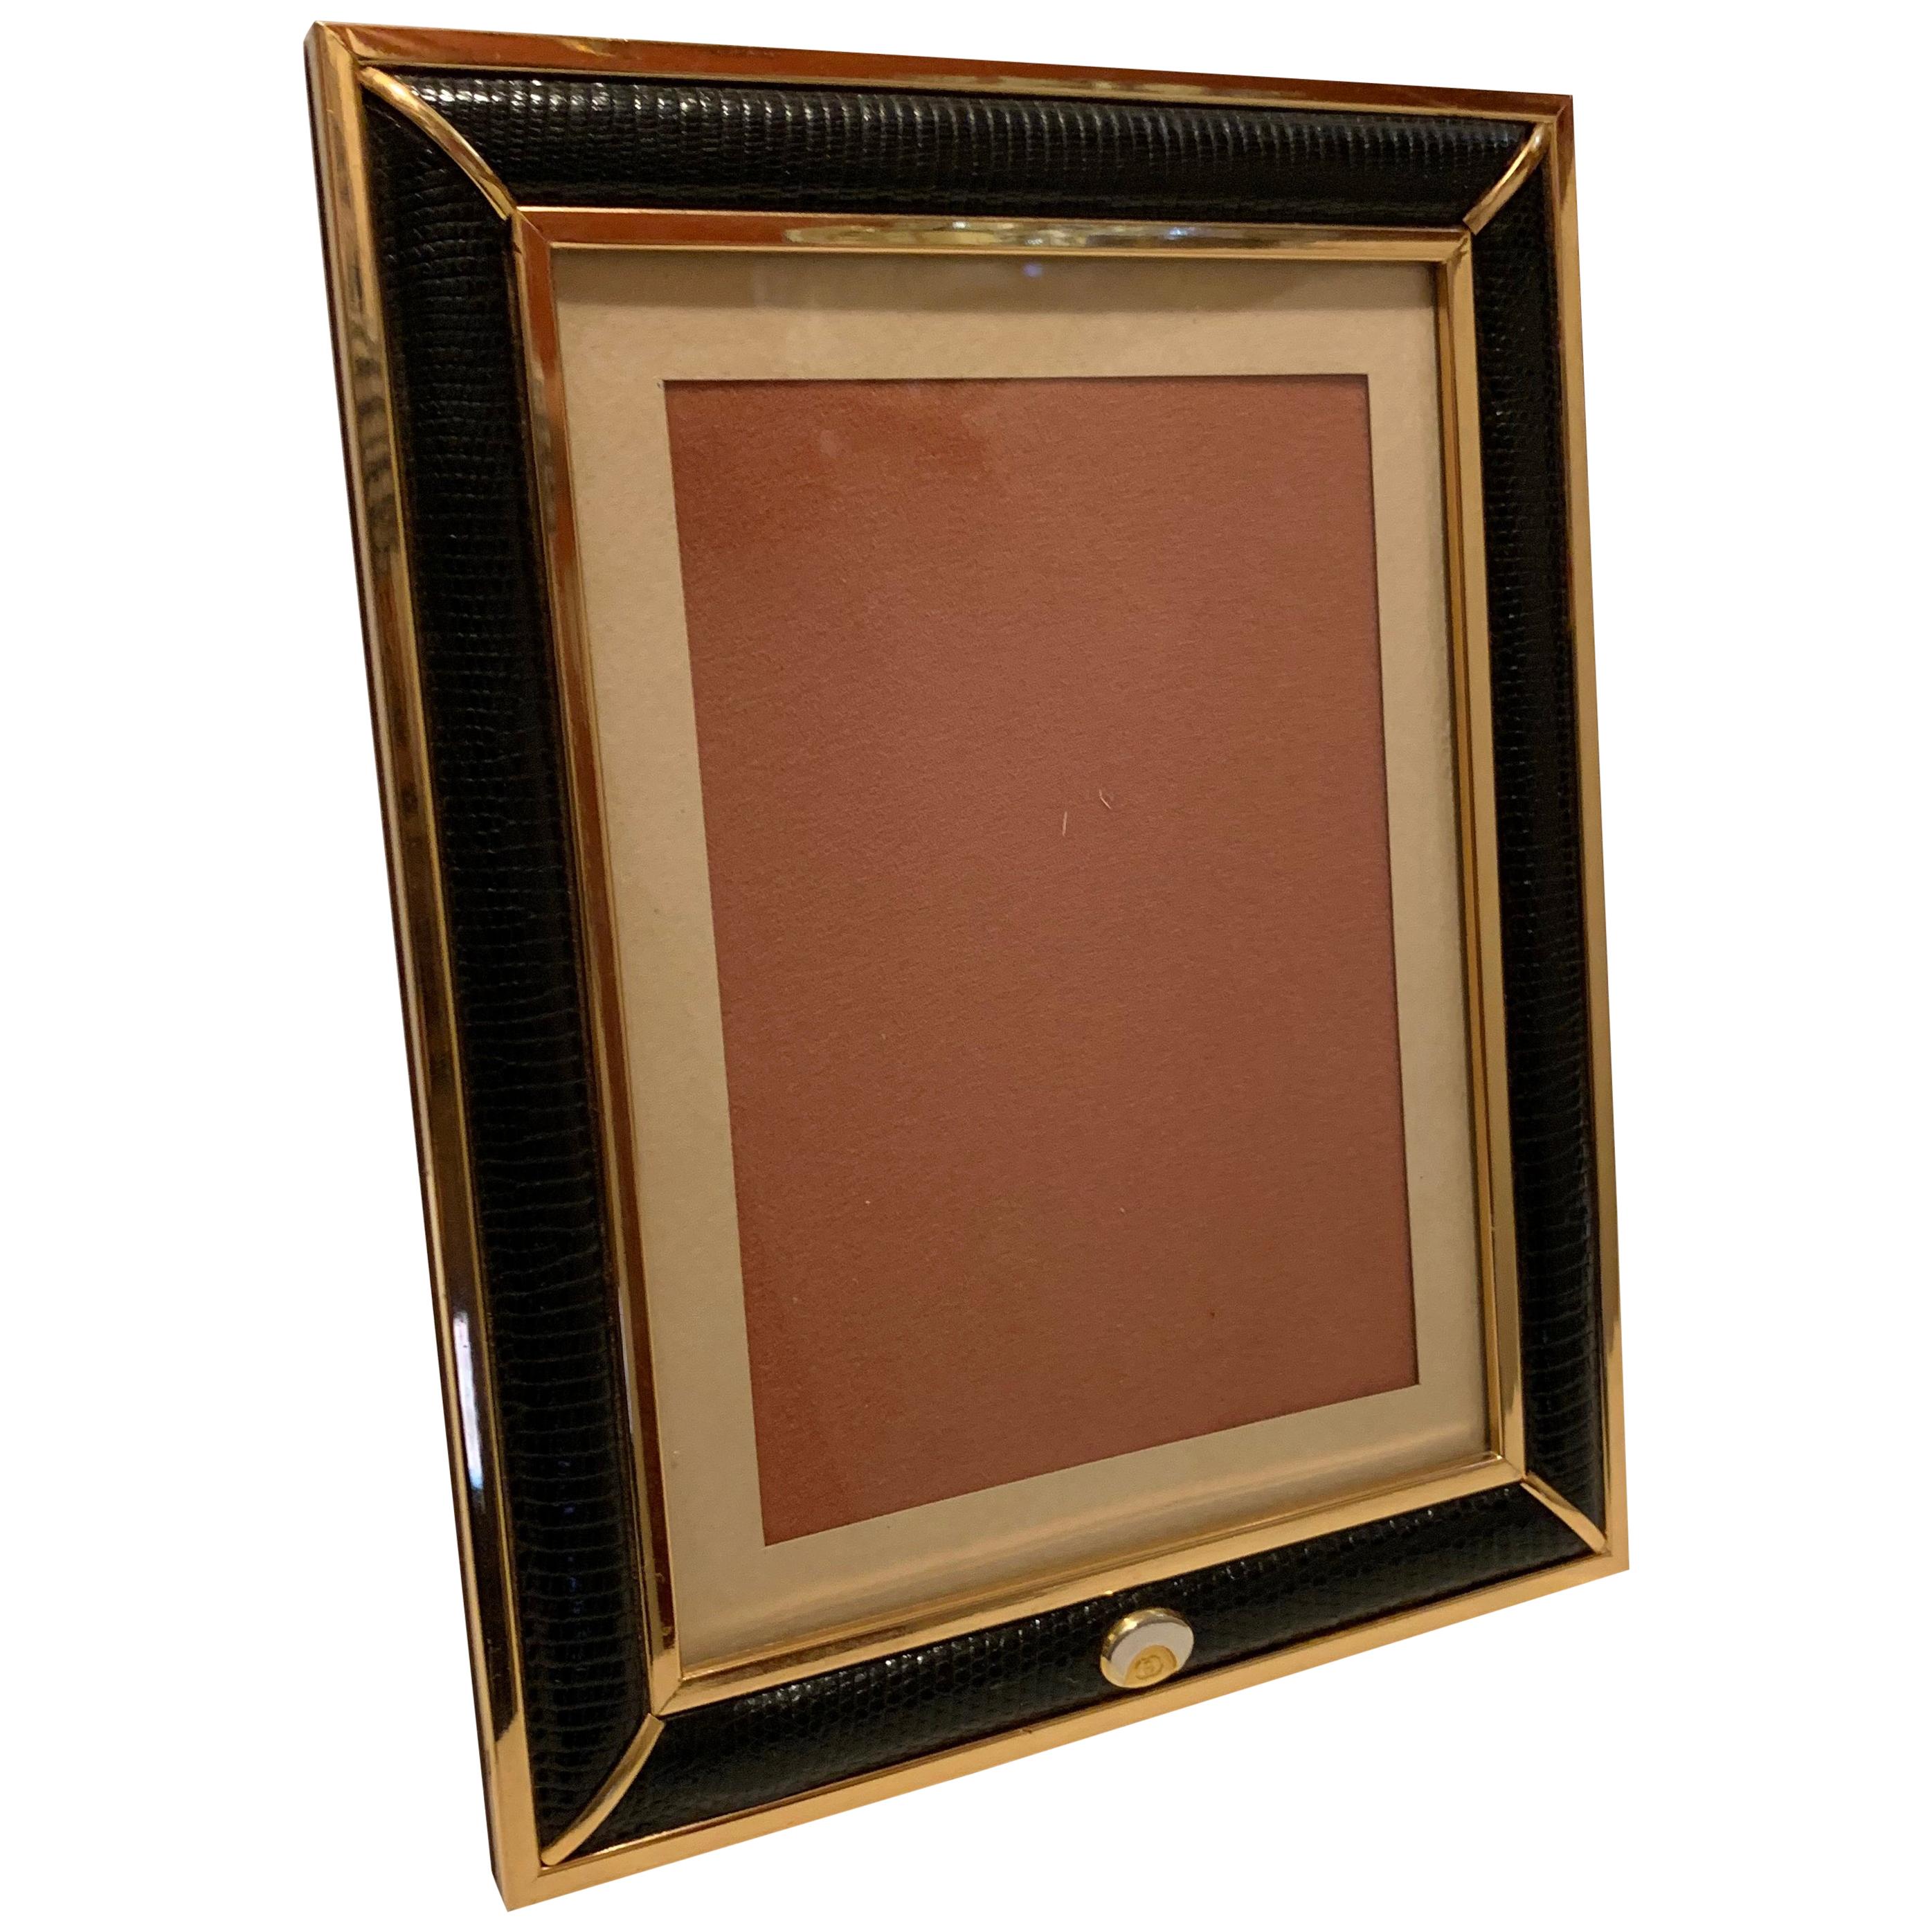 Wonderful Gucci Brass Snake Skin Picture Frame Made in Italy Wood Back